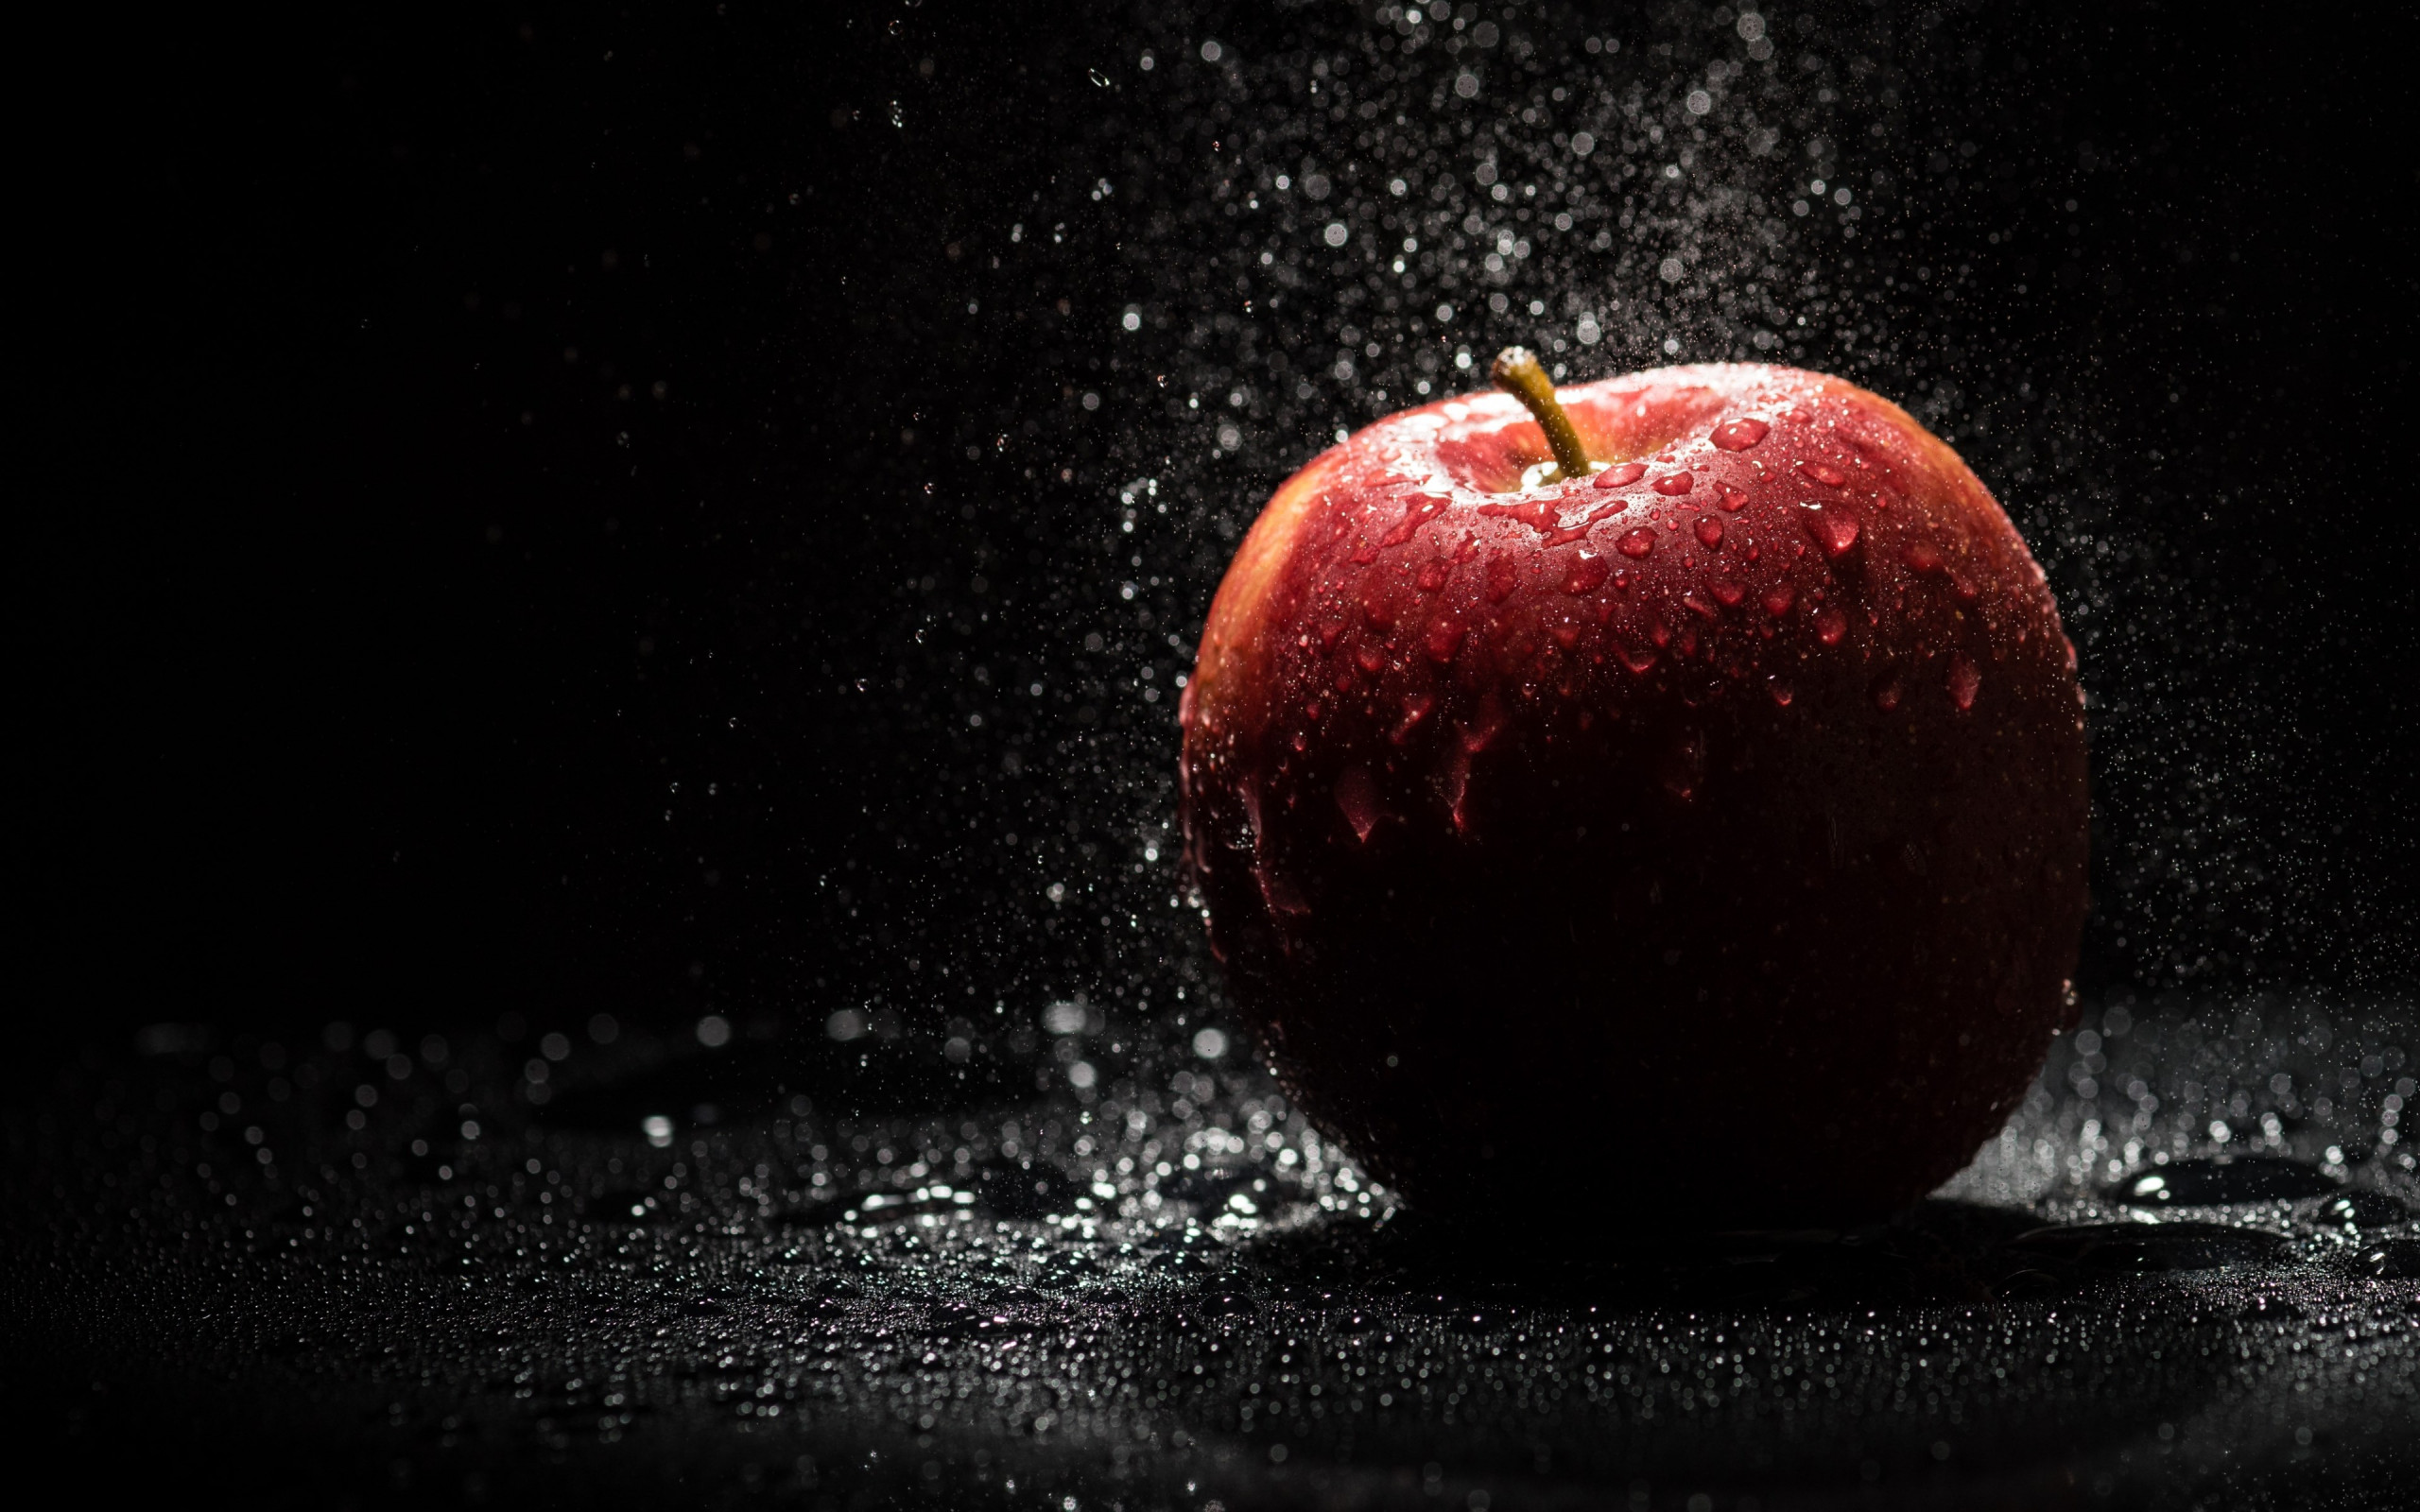 The apple, natural red apple wallpaper 2560x1600